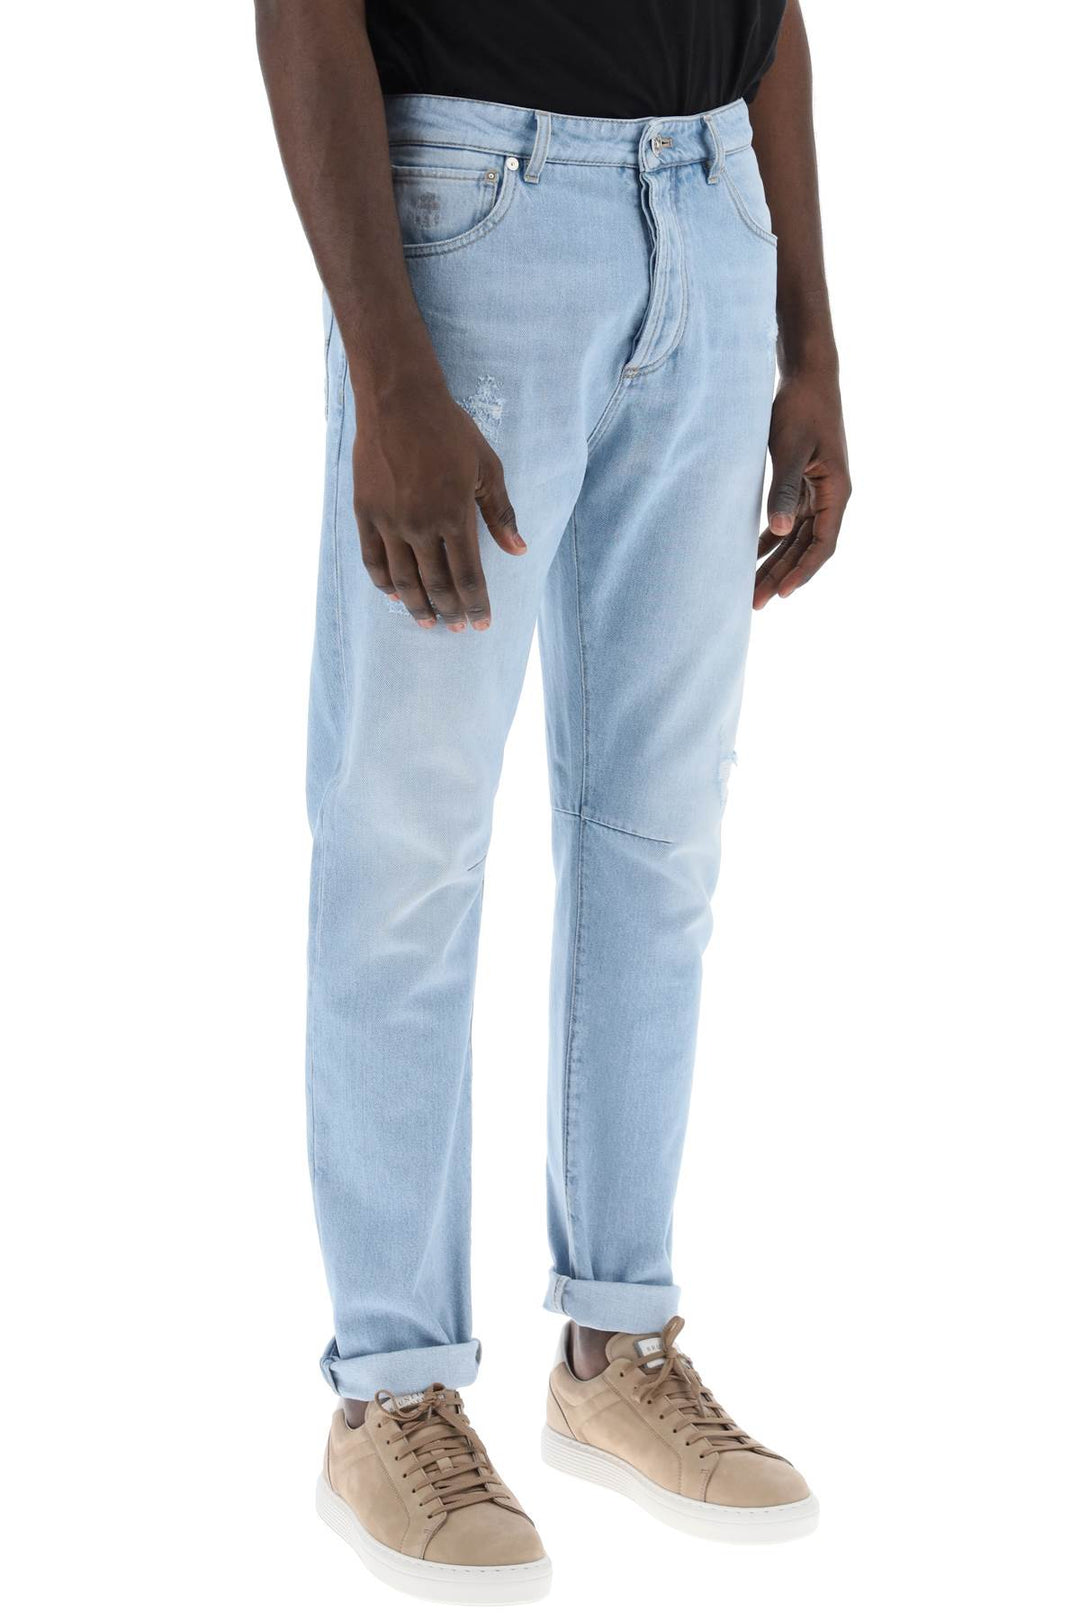 Brunello Cucinelli Leisure Fit Jeans With Tapered Cut   Celeste